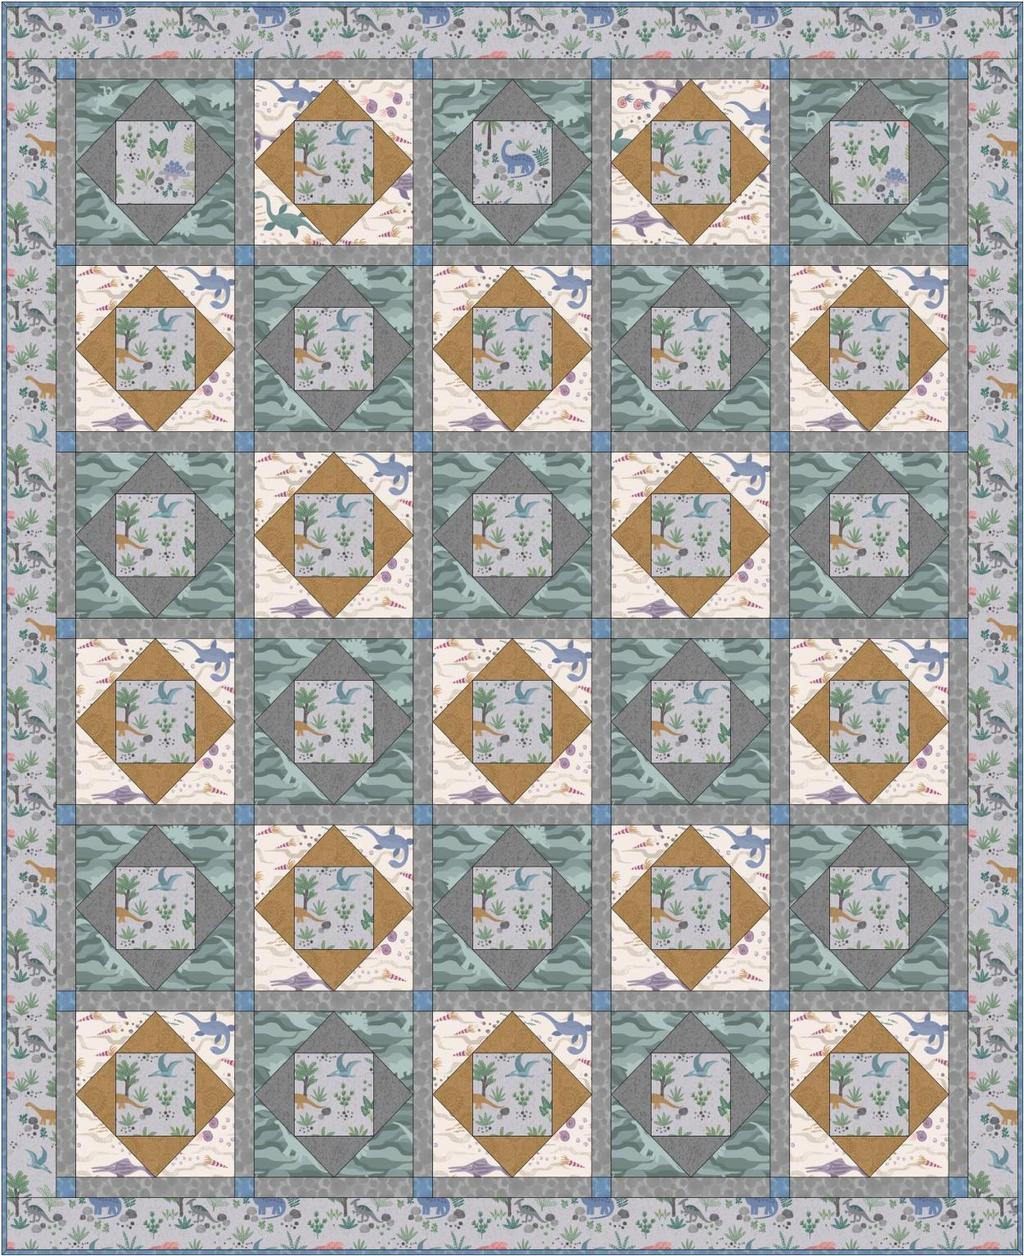 Kimmeridge Bay Quilt Designed and made by Sally Ablett Quilt Size: 51 x 60 Block Size: 8½ x 8½ DESIGN 2 (Main Diagram) FABRIC REQUIREMENTS (Kimmeridge Bay Collection) Fabric 1: ⅝yd - 70cm - A301.